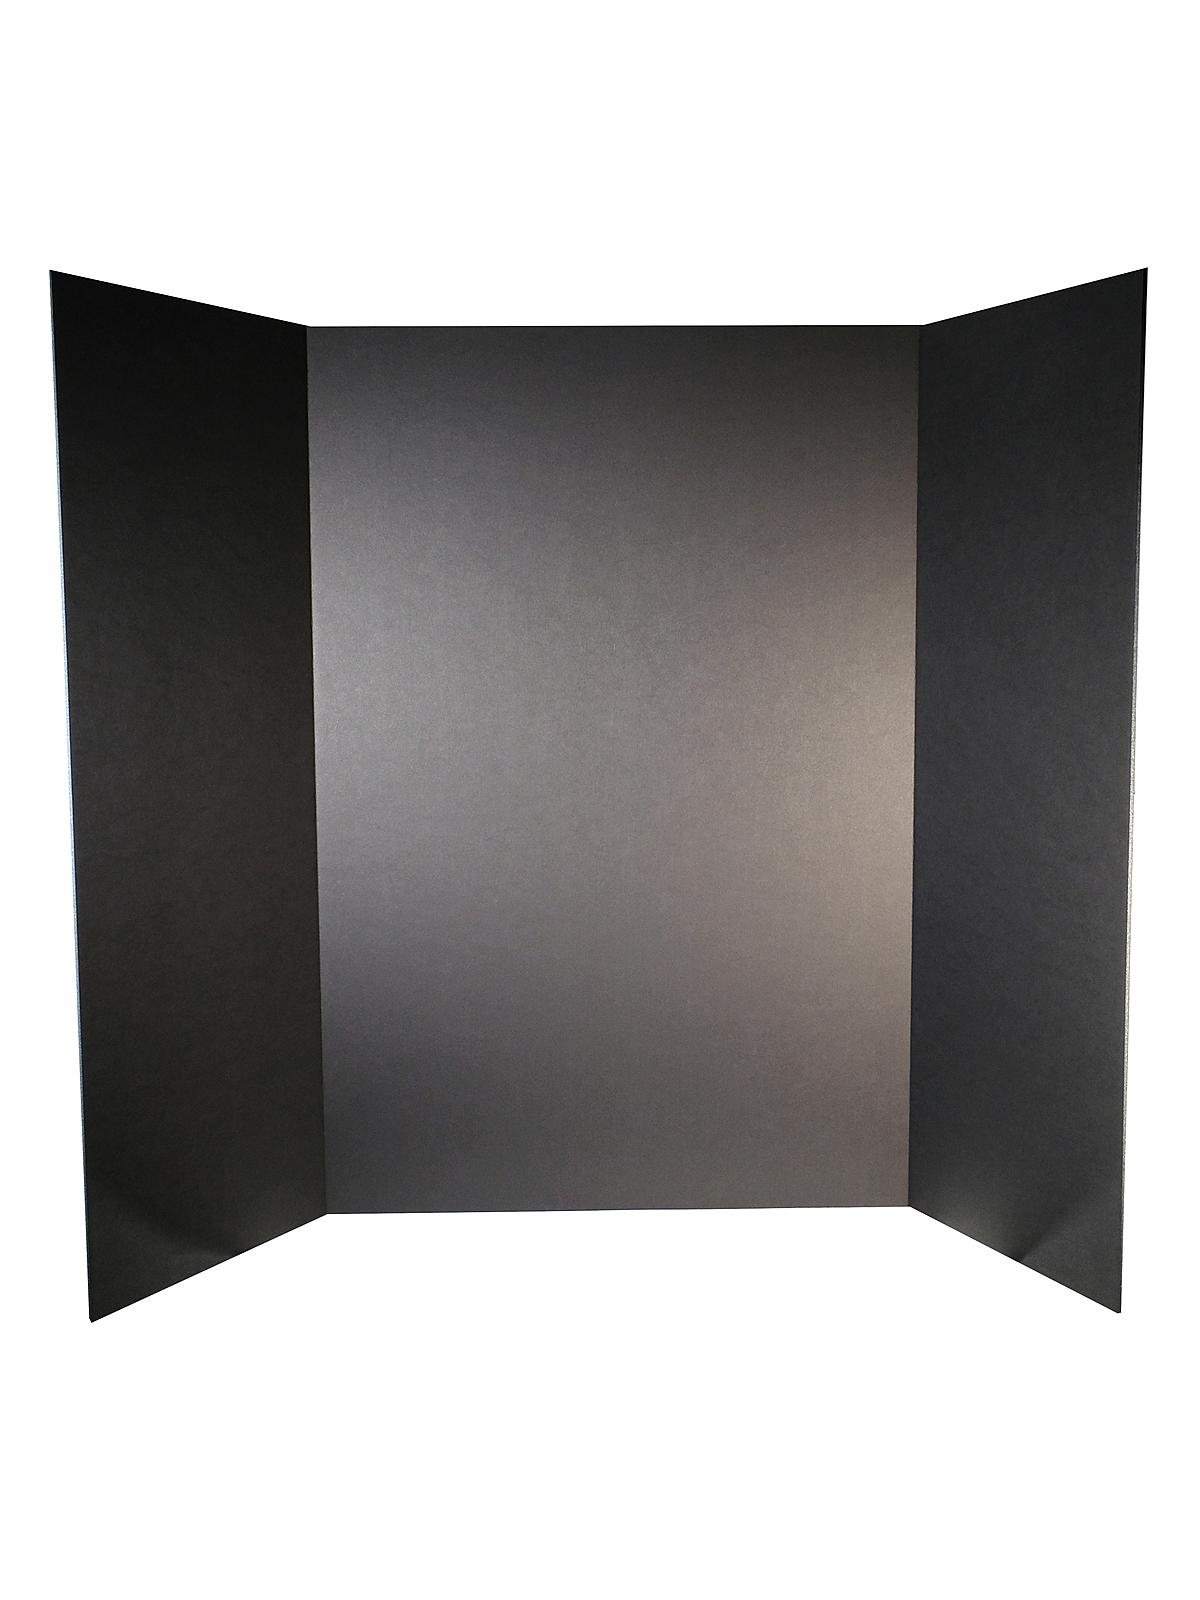 White for sale online Elmer's 730300 Corrugated Display Board 